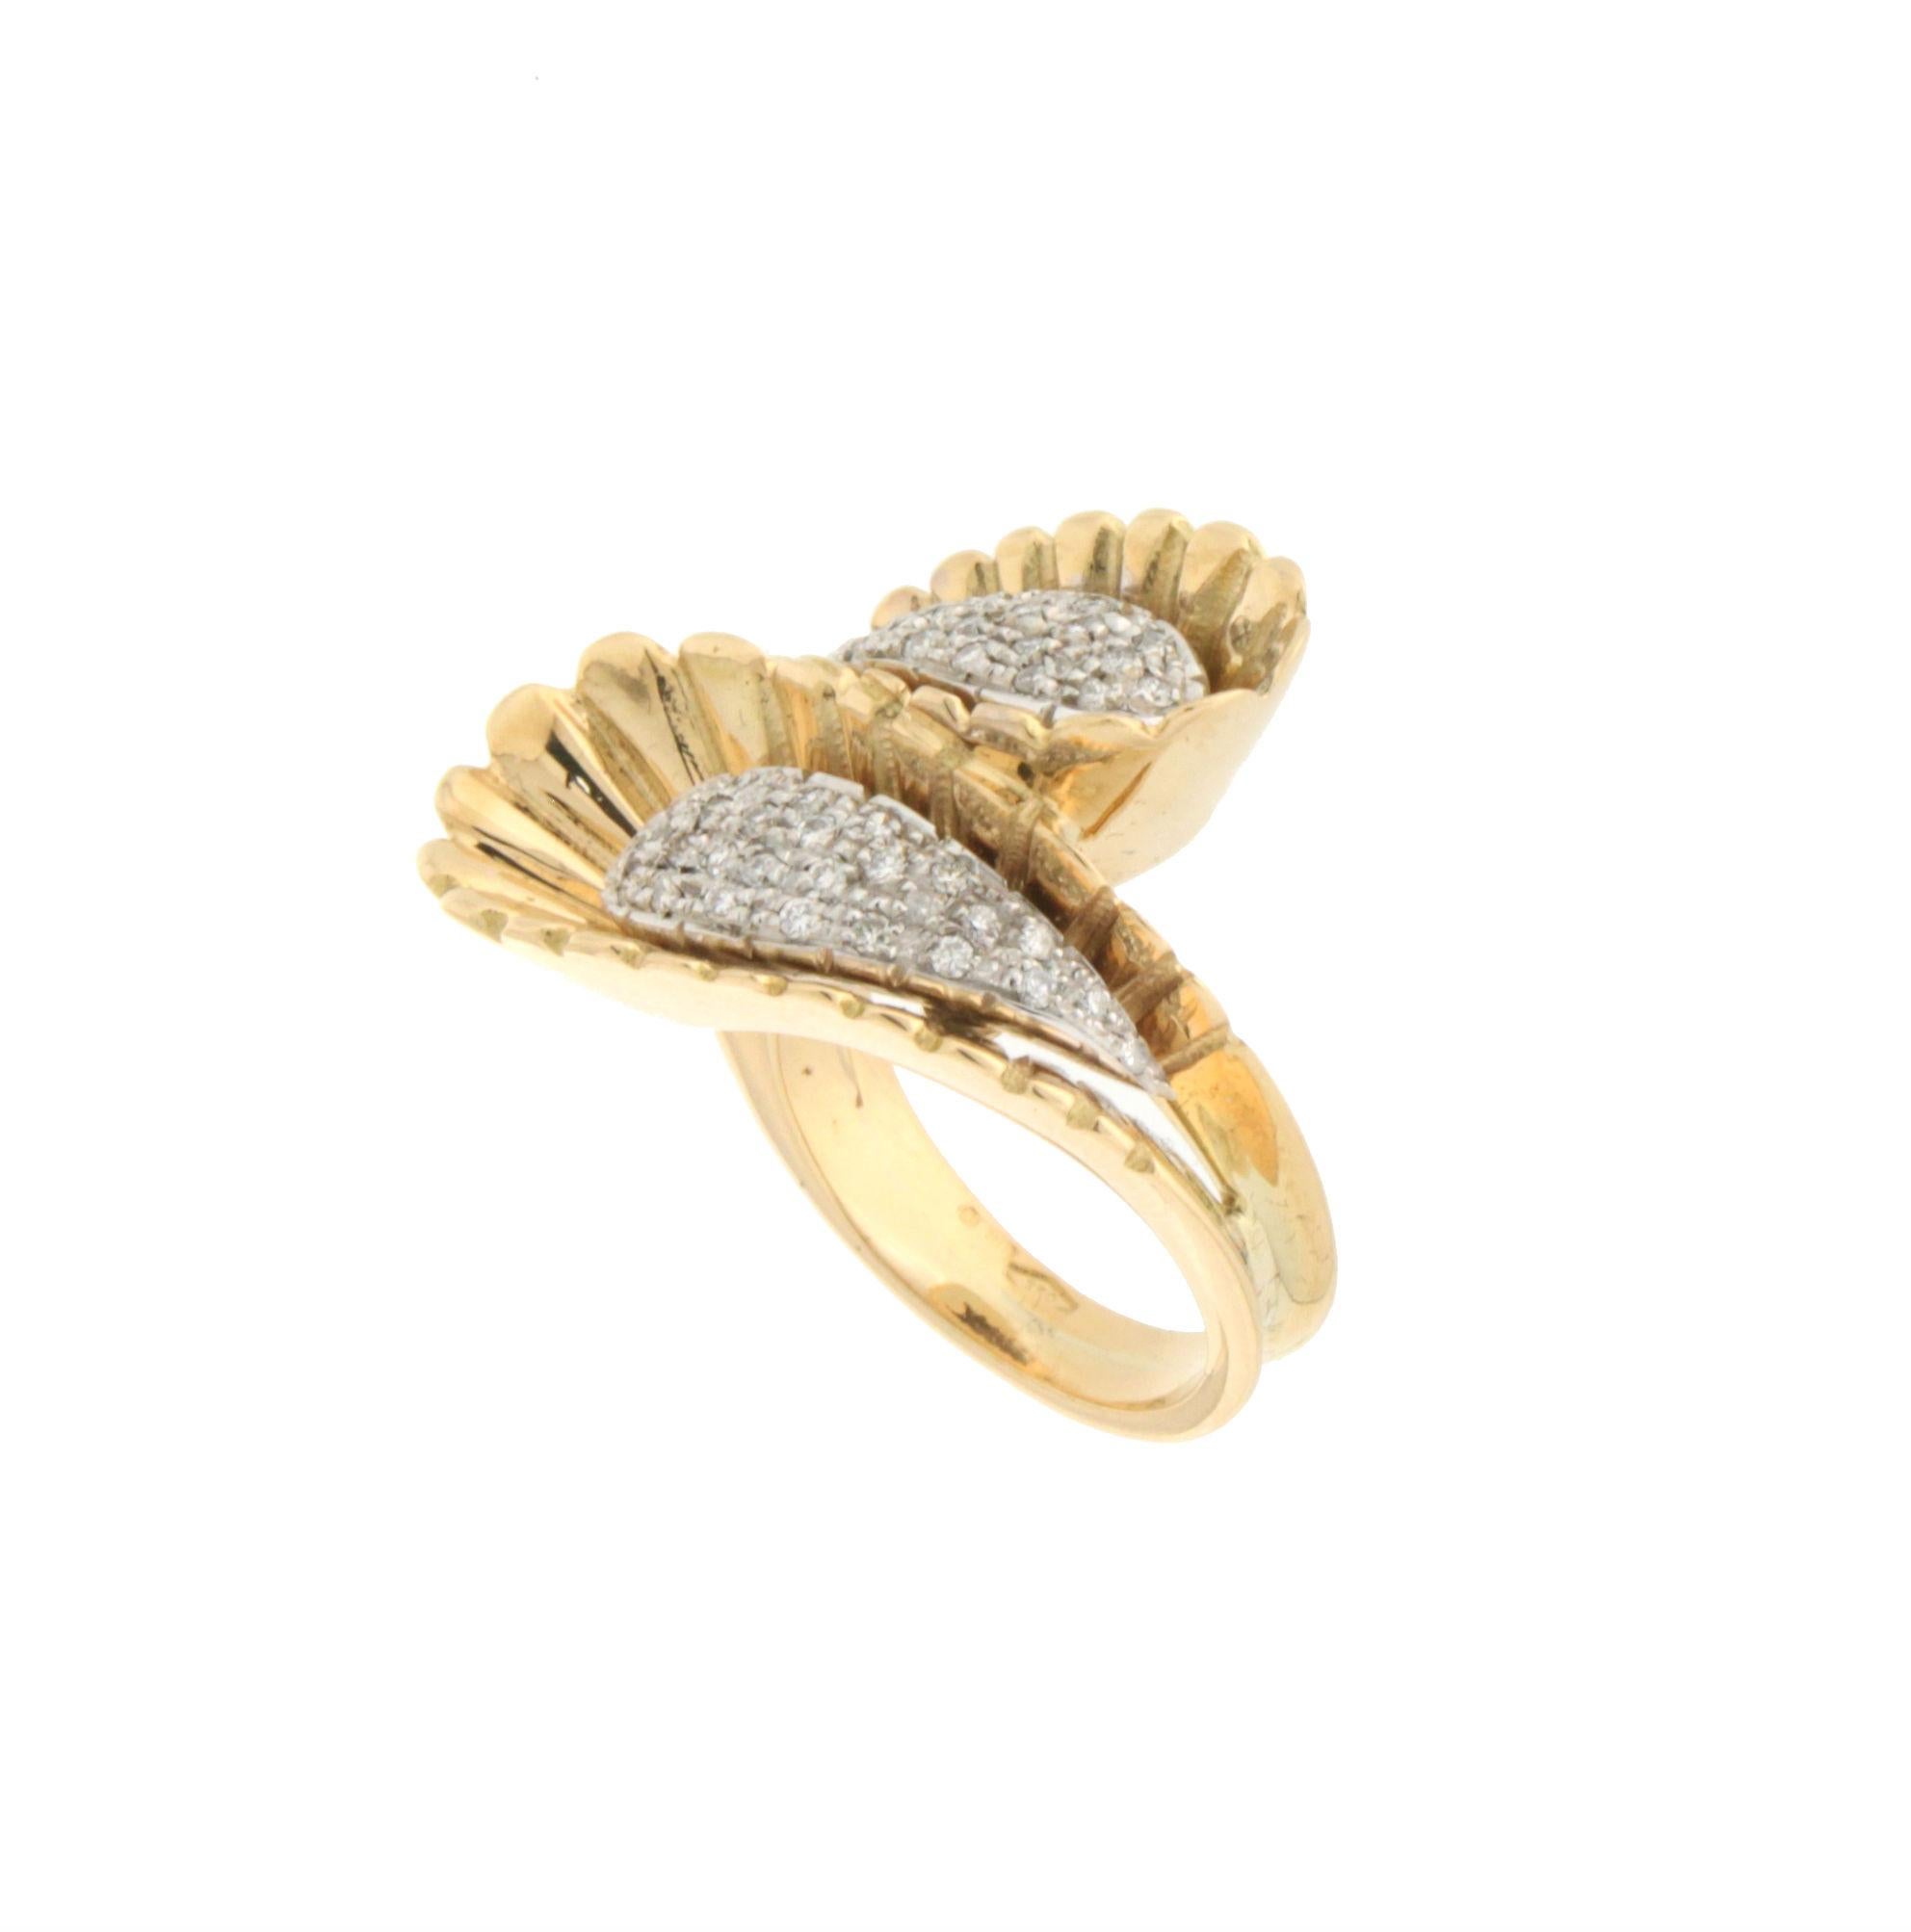 18 karat white and yellow gold cocktail ring. Handmade by our artisans assembled with diamonds.

Diamonds weight 0.40 karat
Ring total weight 19.70 grams
Ring size 13.90 Ita

(all rings are can be resized)